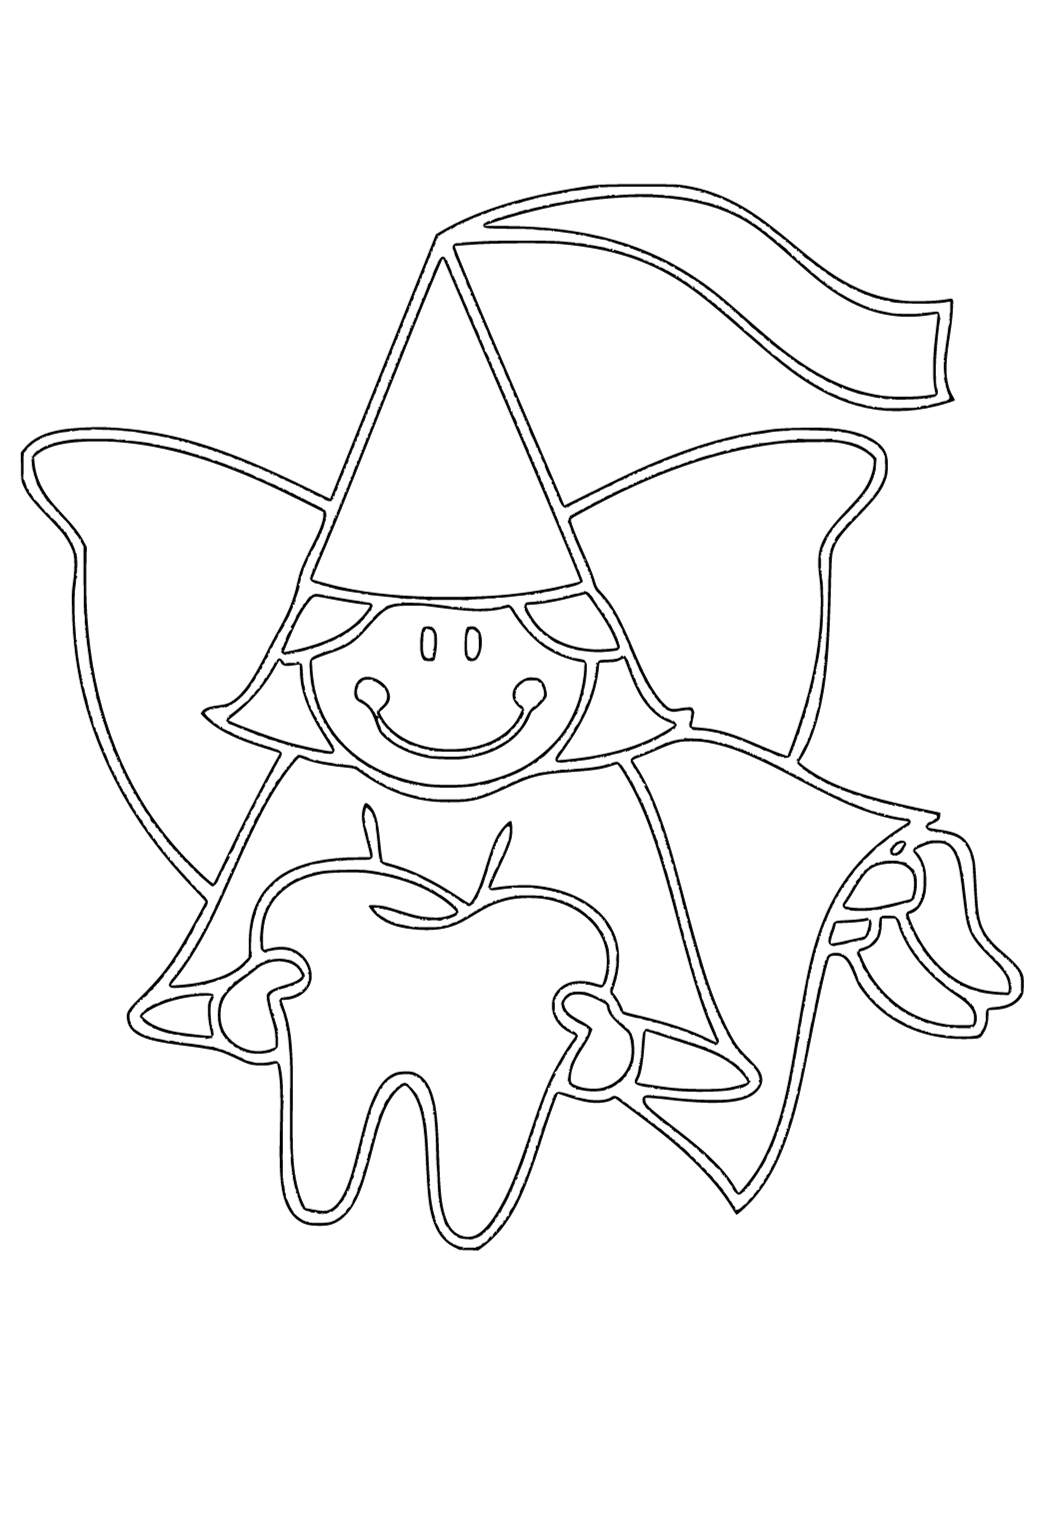 Free printable tooth fairy coloring page for adults and kids